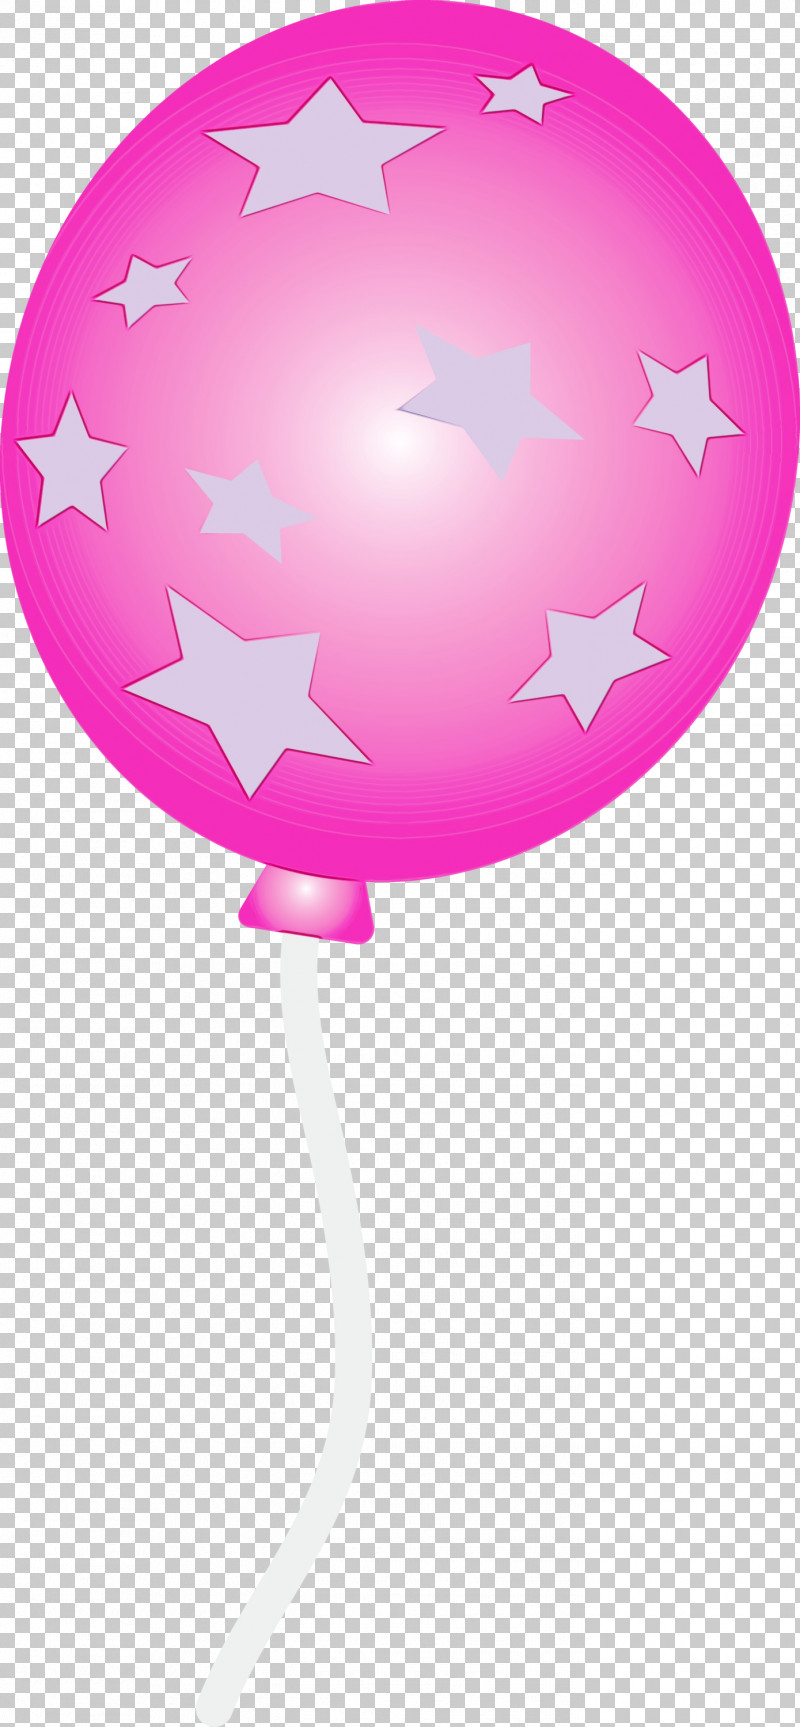 Balloon Pink Magenta Party Supply PNG, Clipart, Balloon, Magenta, Paint, Party Supply, Pink Free PNG Download